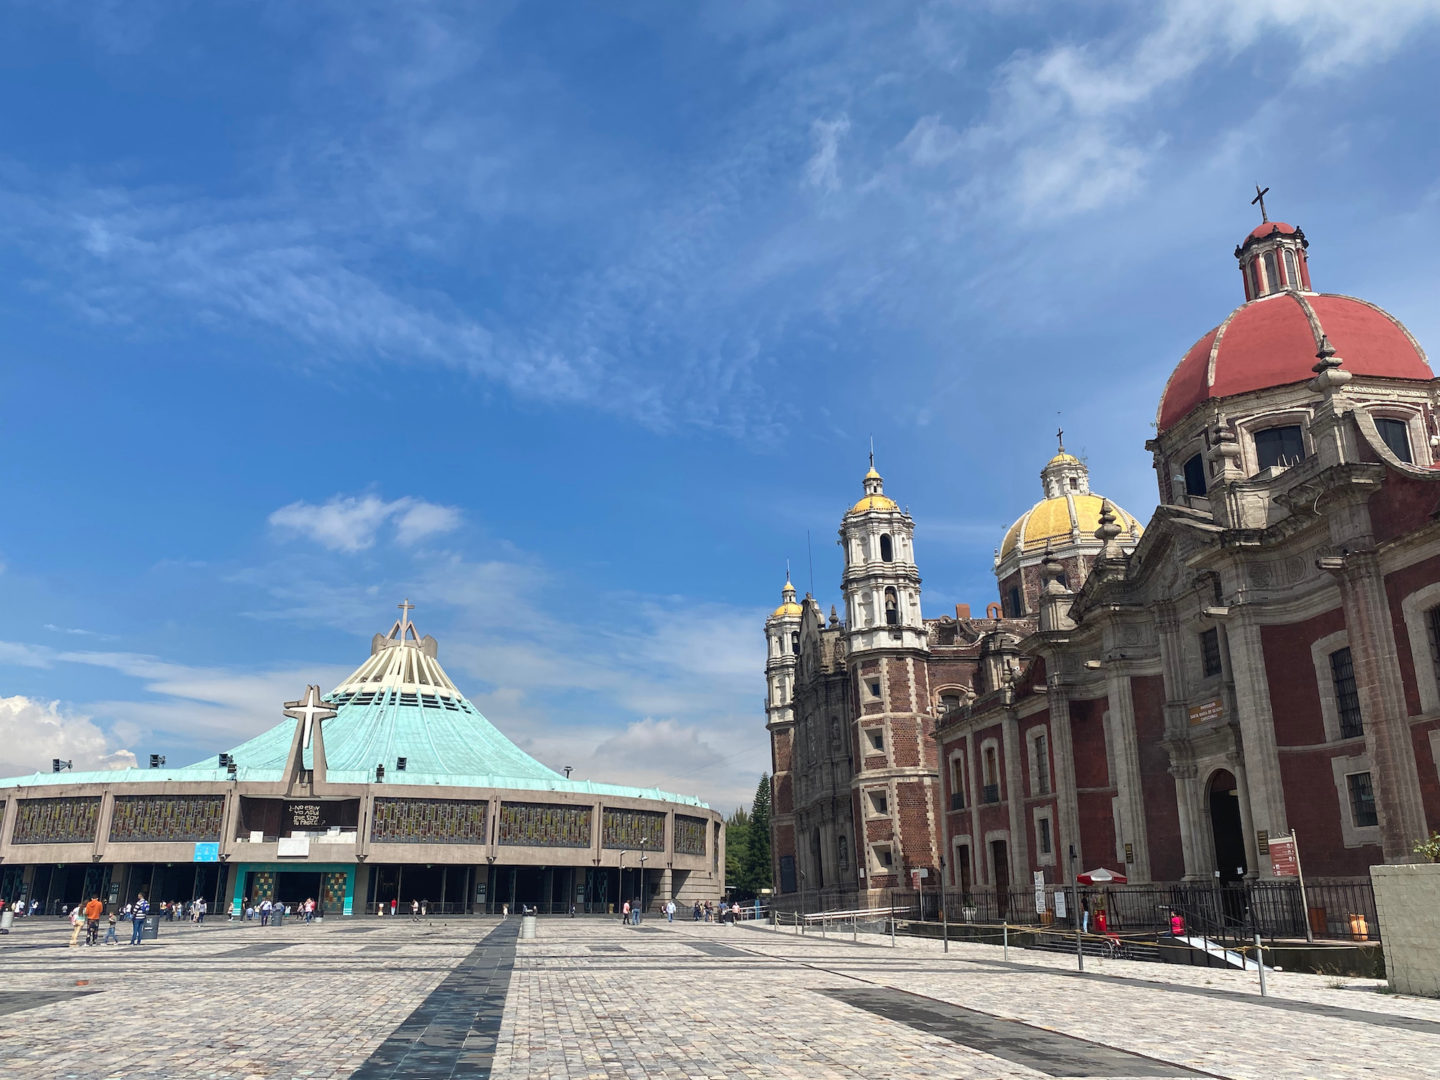 New Basilica (left) and Basilica of Our Lady of Guadalupe (right), Mexico City, Mexico